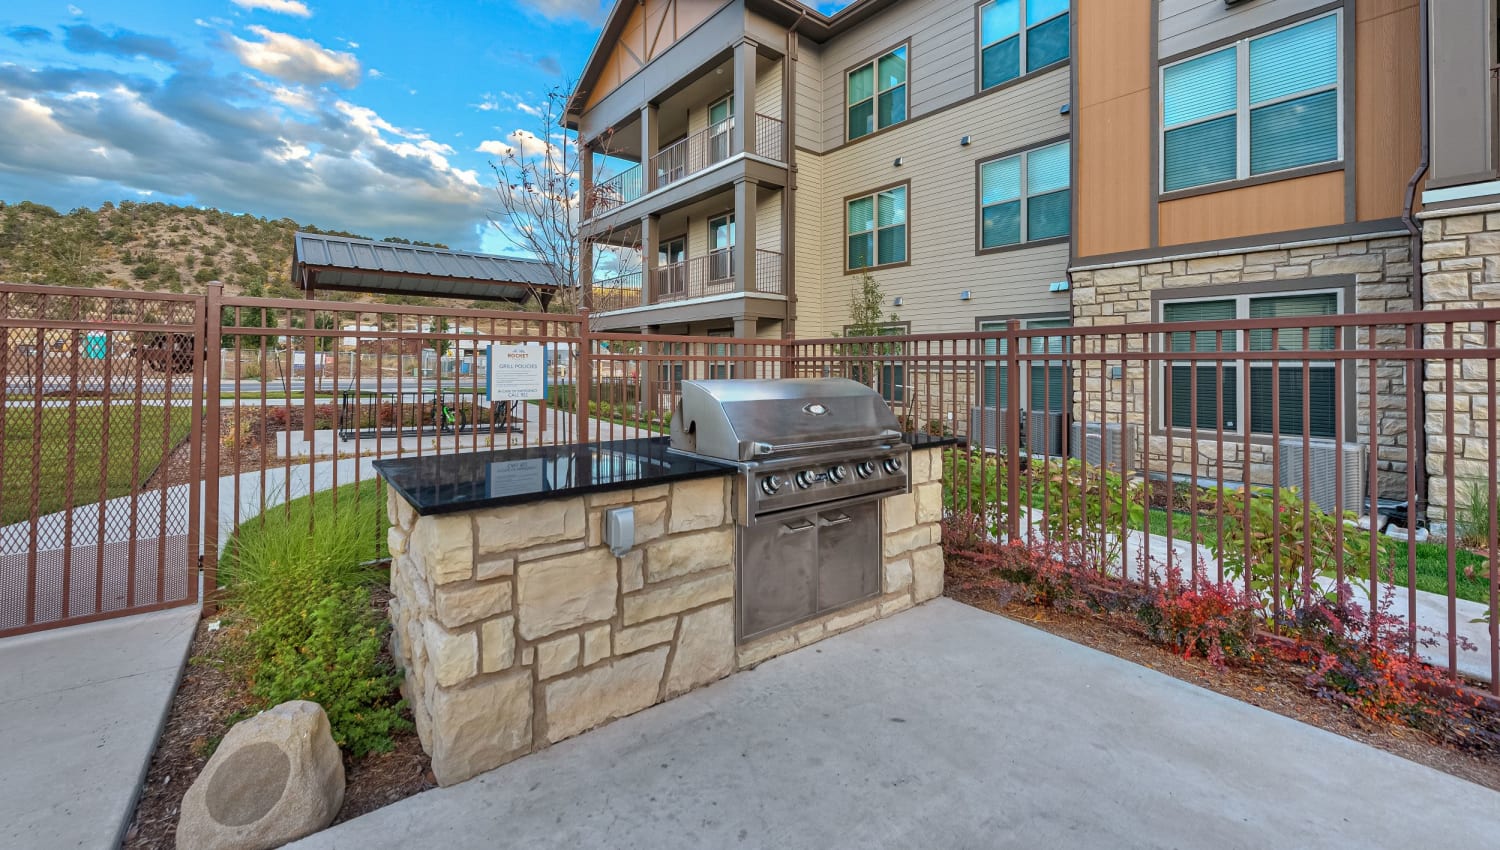 Barbecue and grilling station at Rocket Pointe in Durango, Colorado